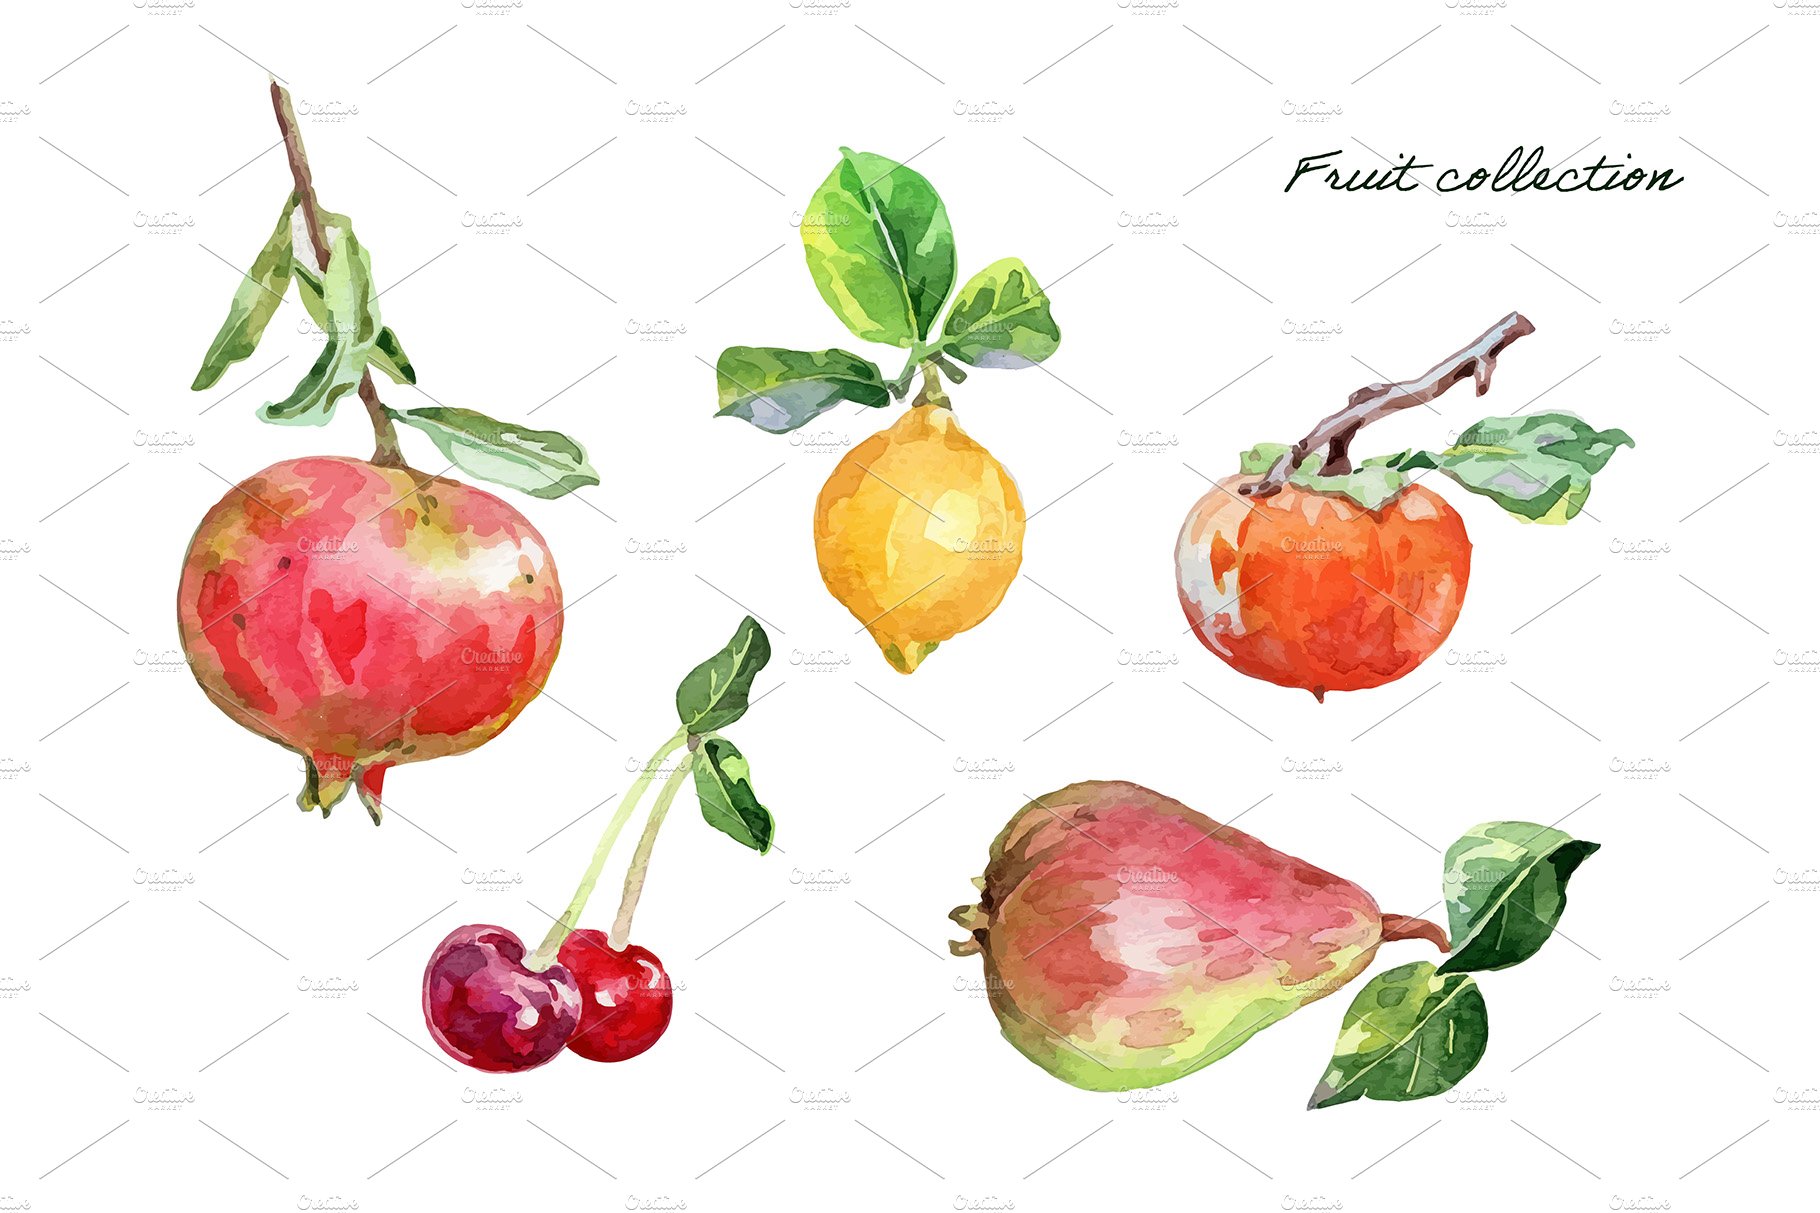 Watercolor fruit collection cover image.